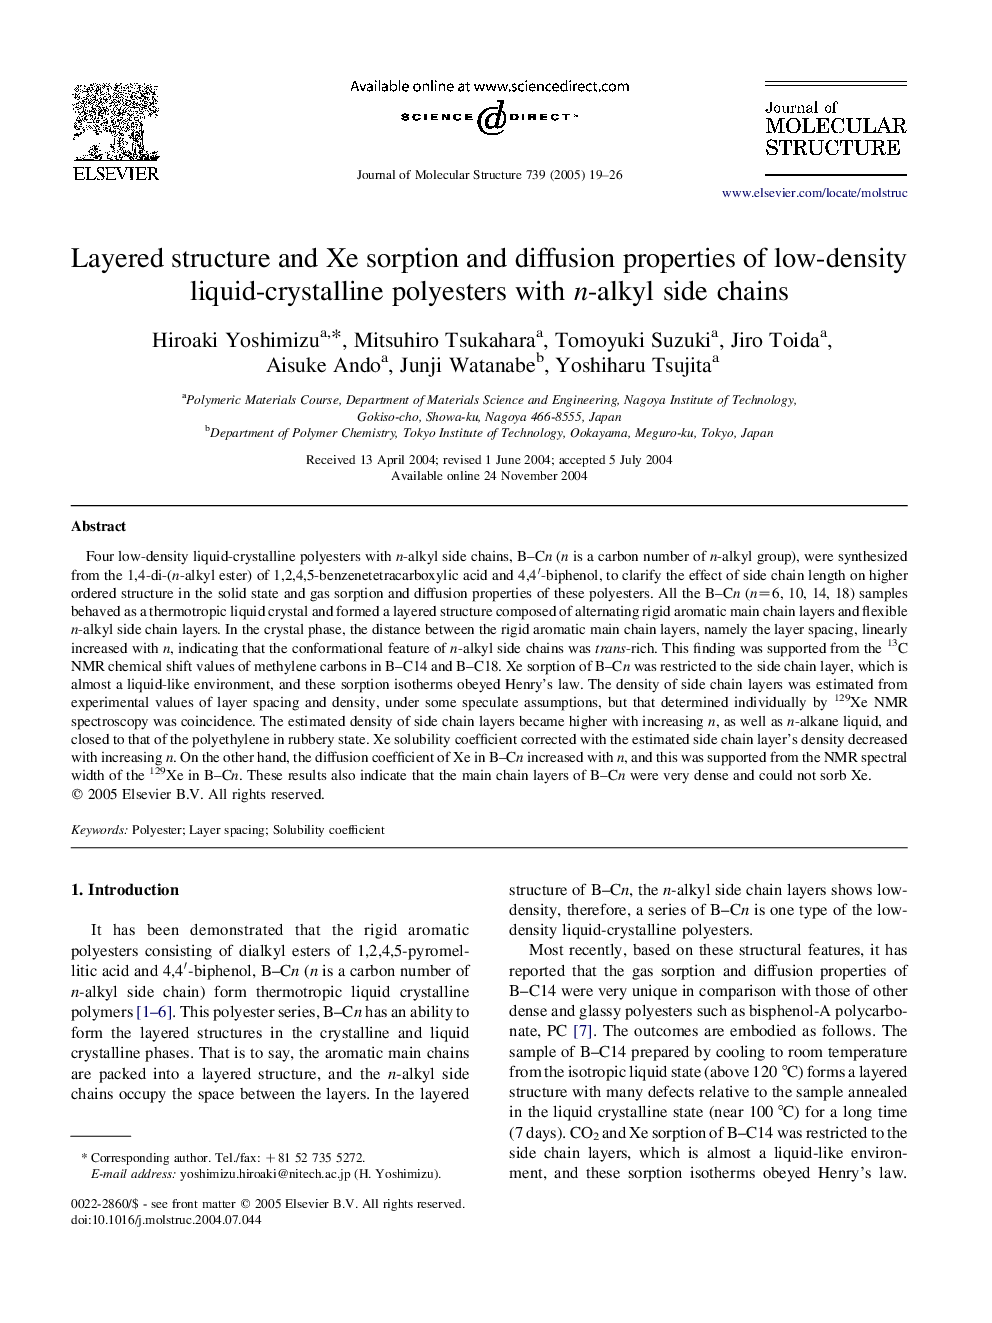 Layered structure and Xe sorption and diffusion properties of low-density liquid-crystalline polyesters with n-alkyl side chains